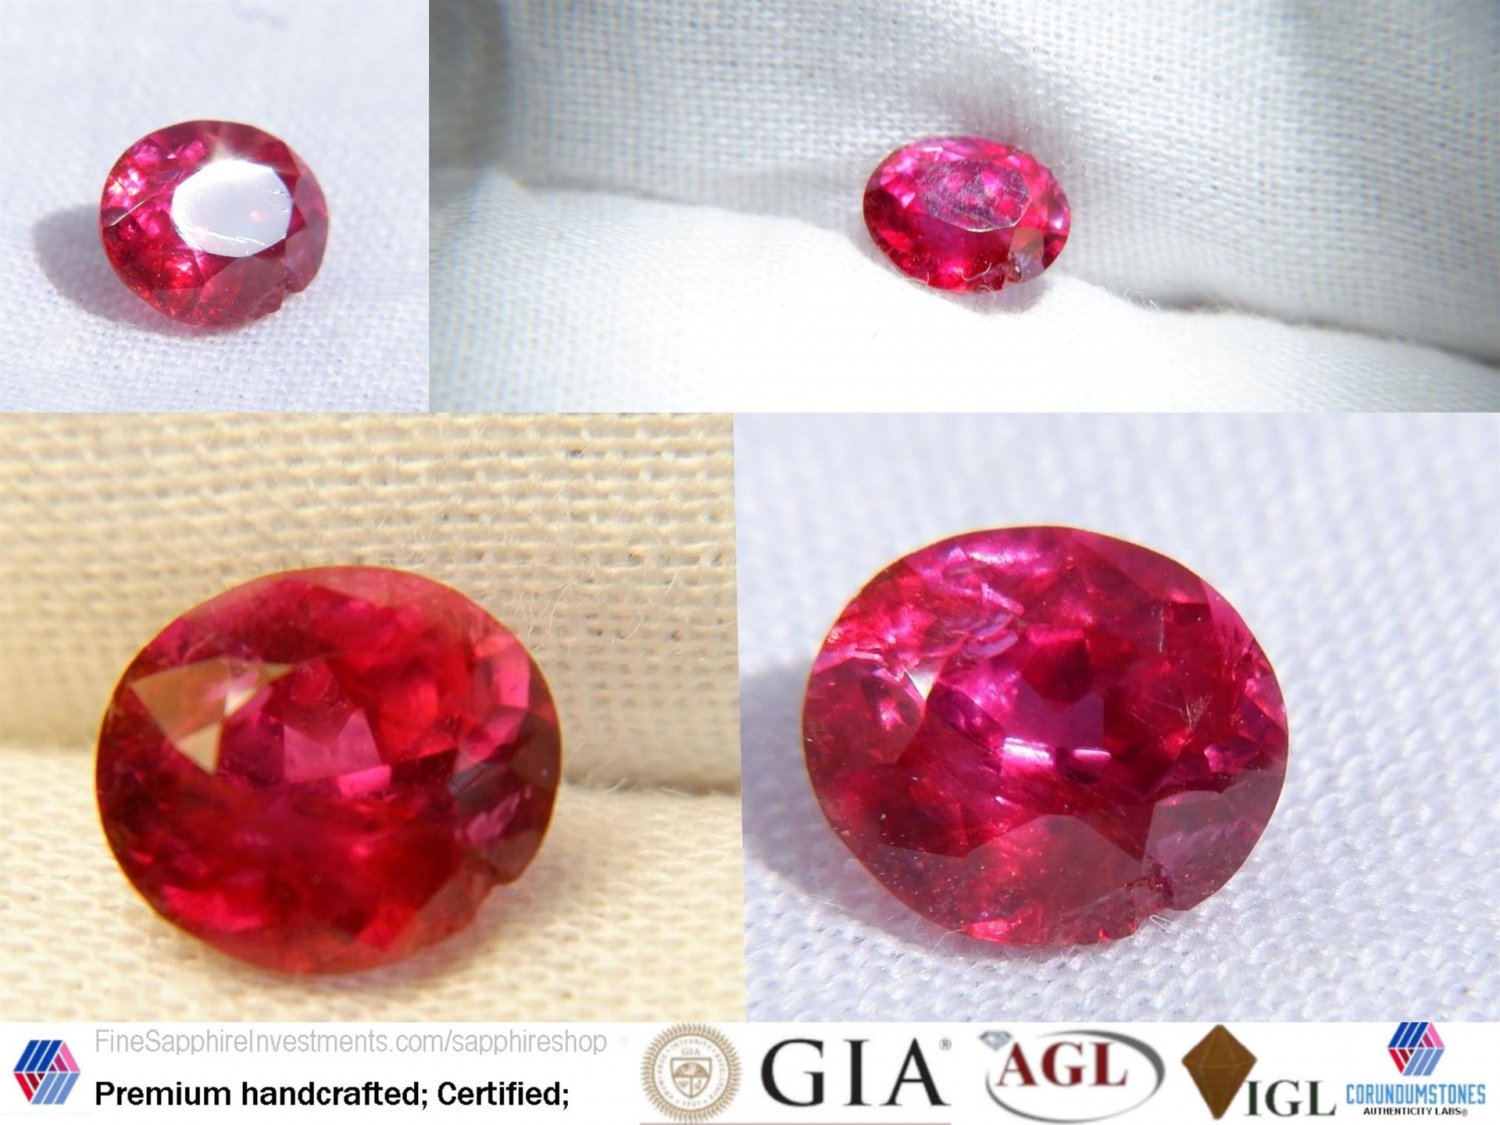 1.083 ct IGL Vivid Red Ruby, unheated, minor flaw, GIA premium handcrafted oval cut, minor flaw duri